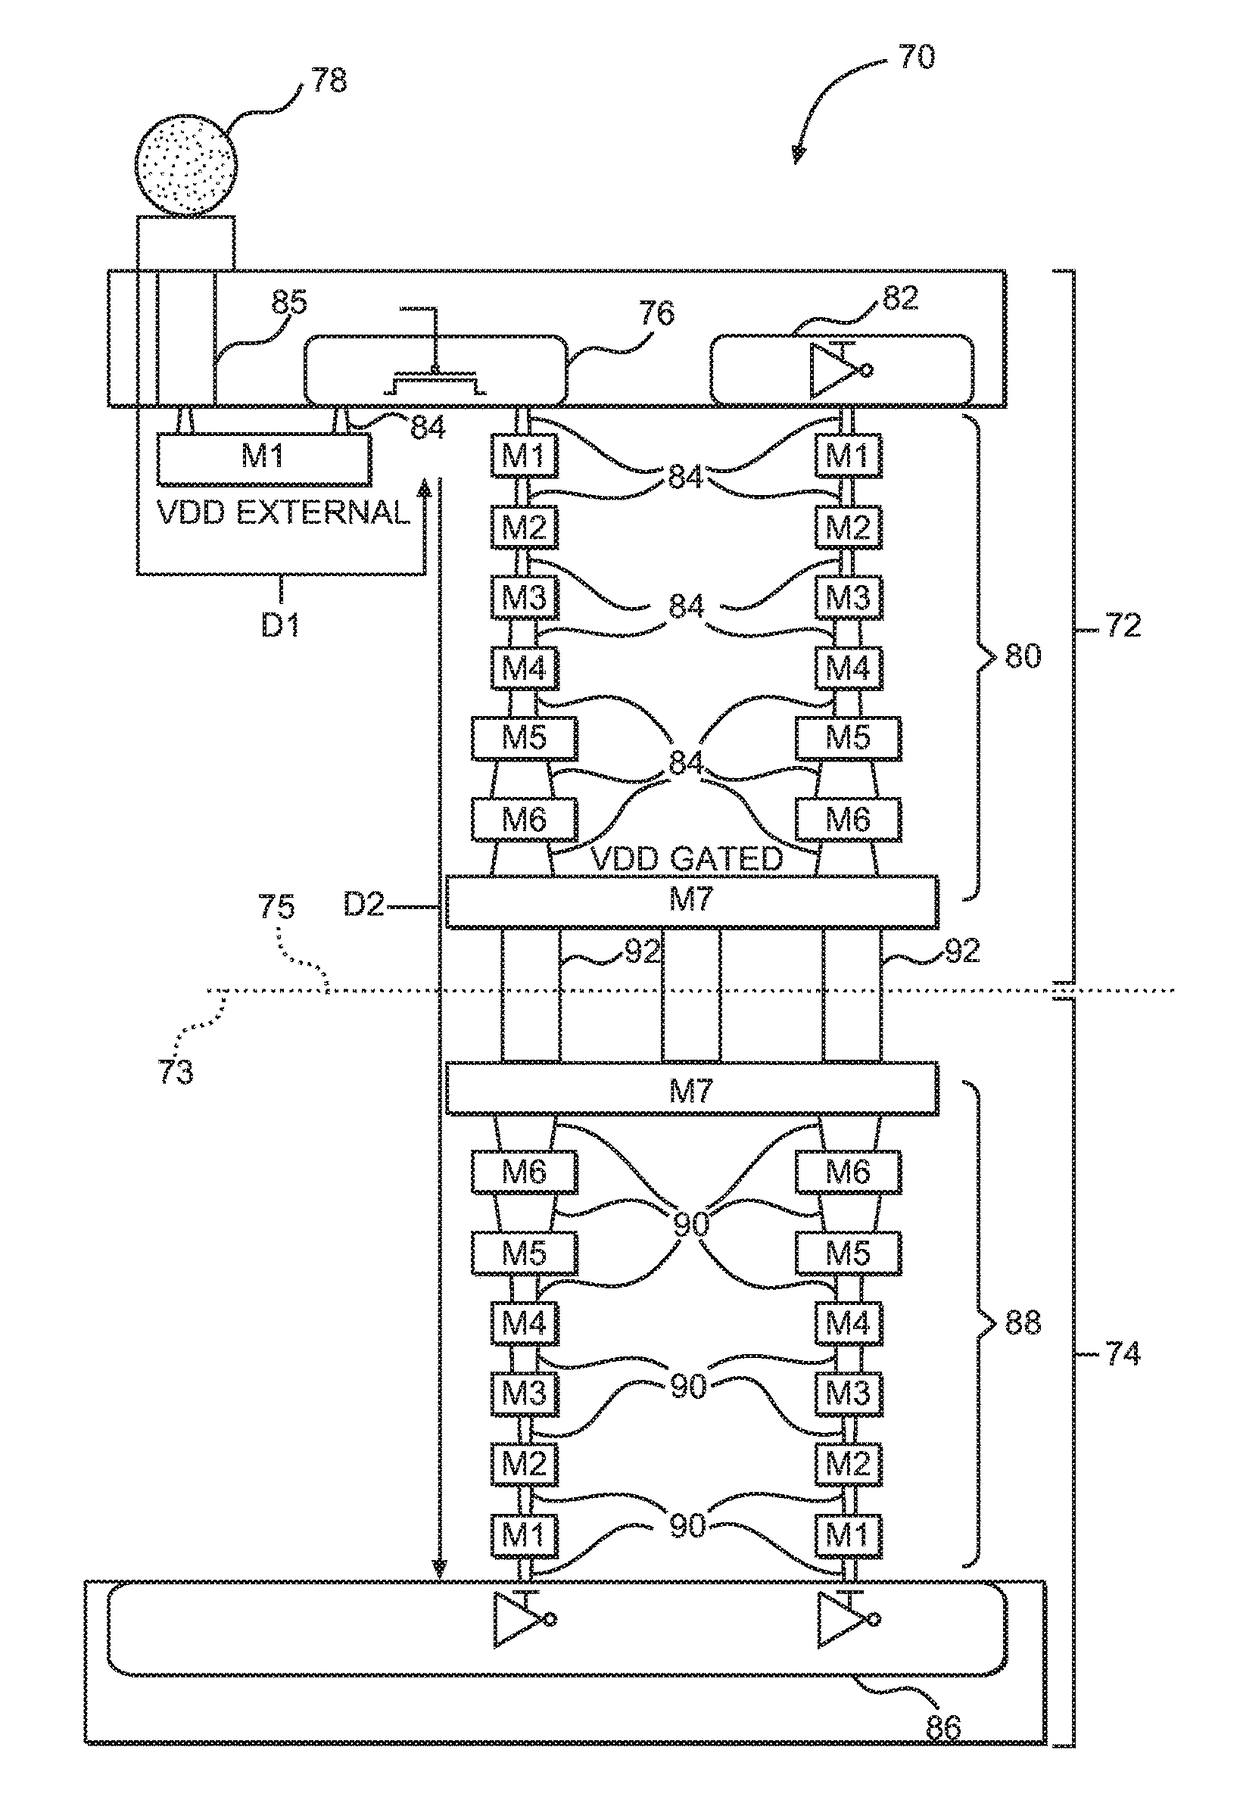 Power gate placement techniques in three-dimensional (3D) integrated circuits (ICs) (3DICs)